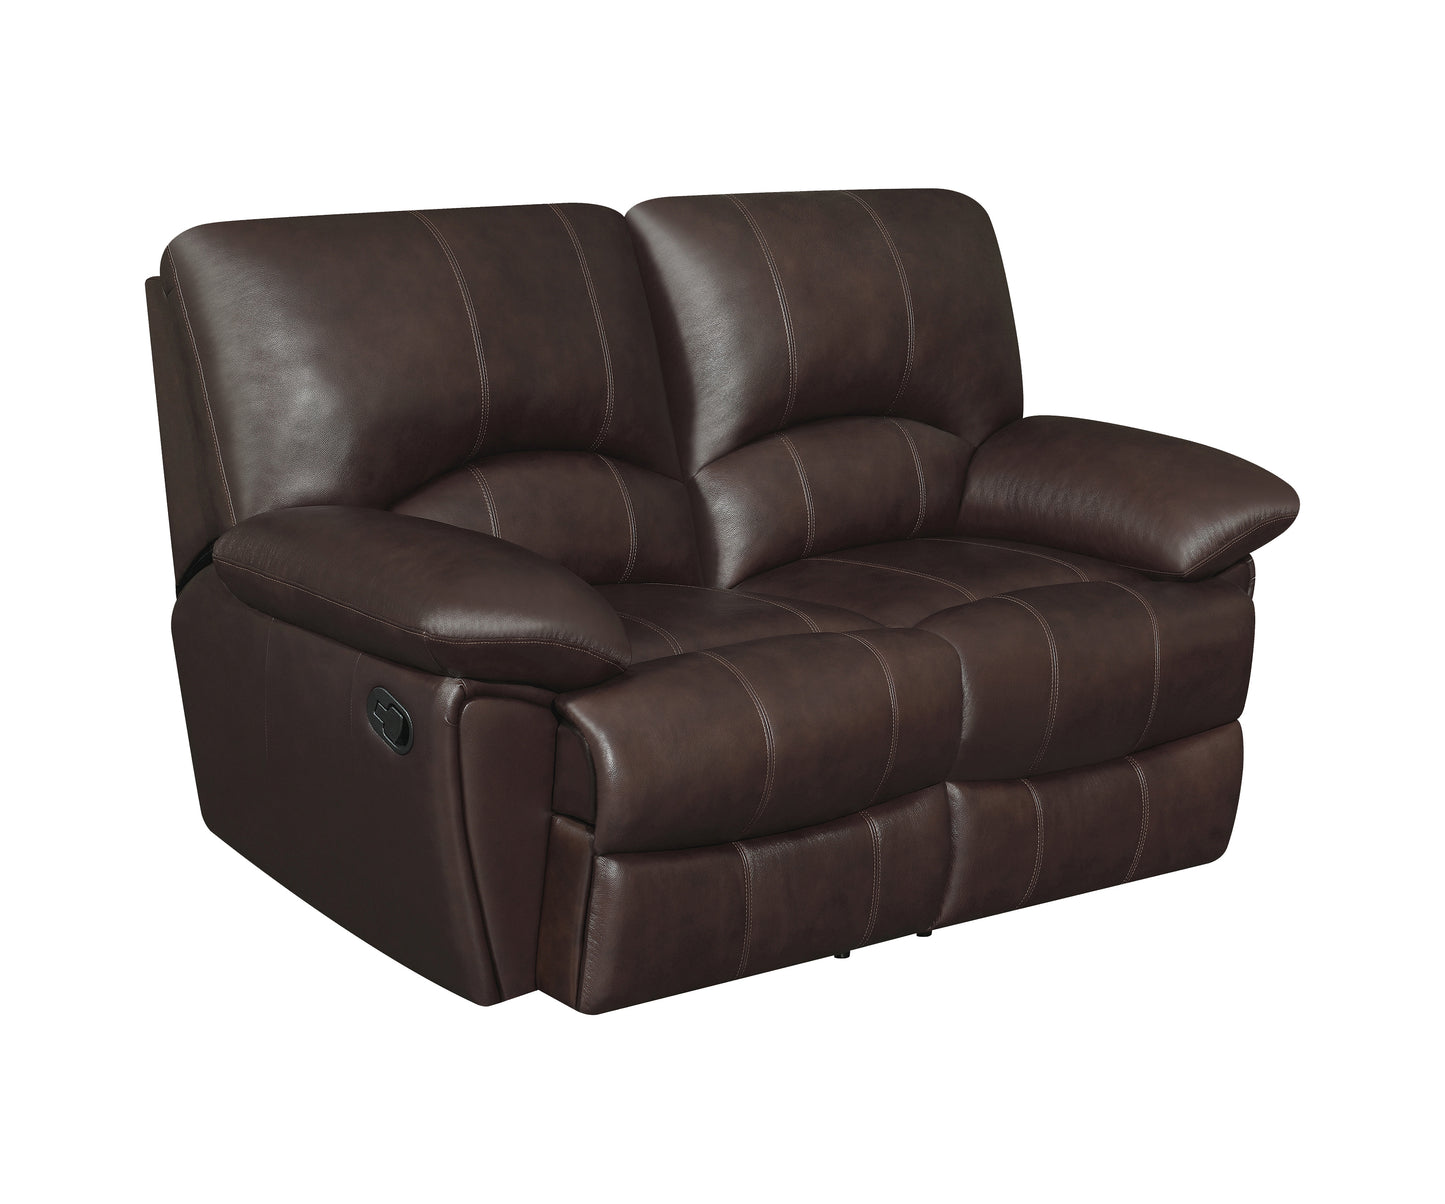 Clifford Top Grain Leather Reclining Sofa BROWN ONLY